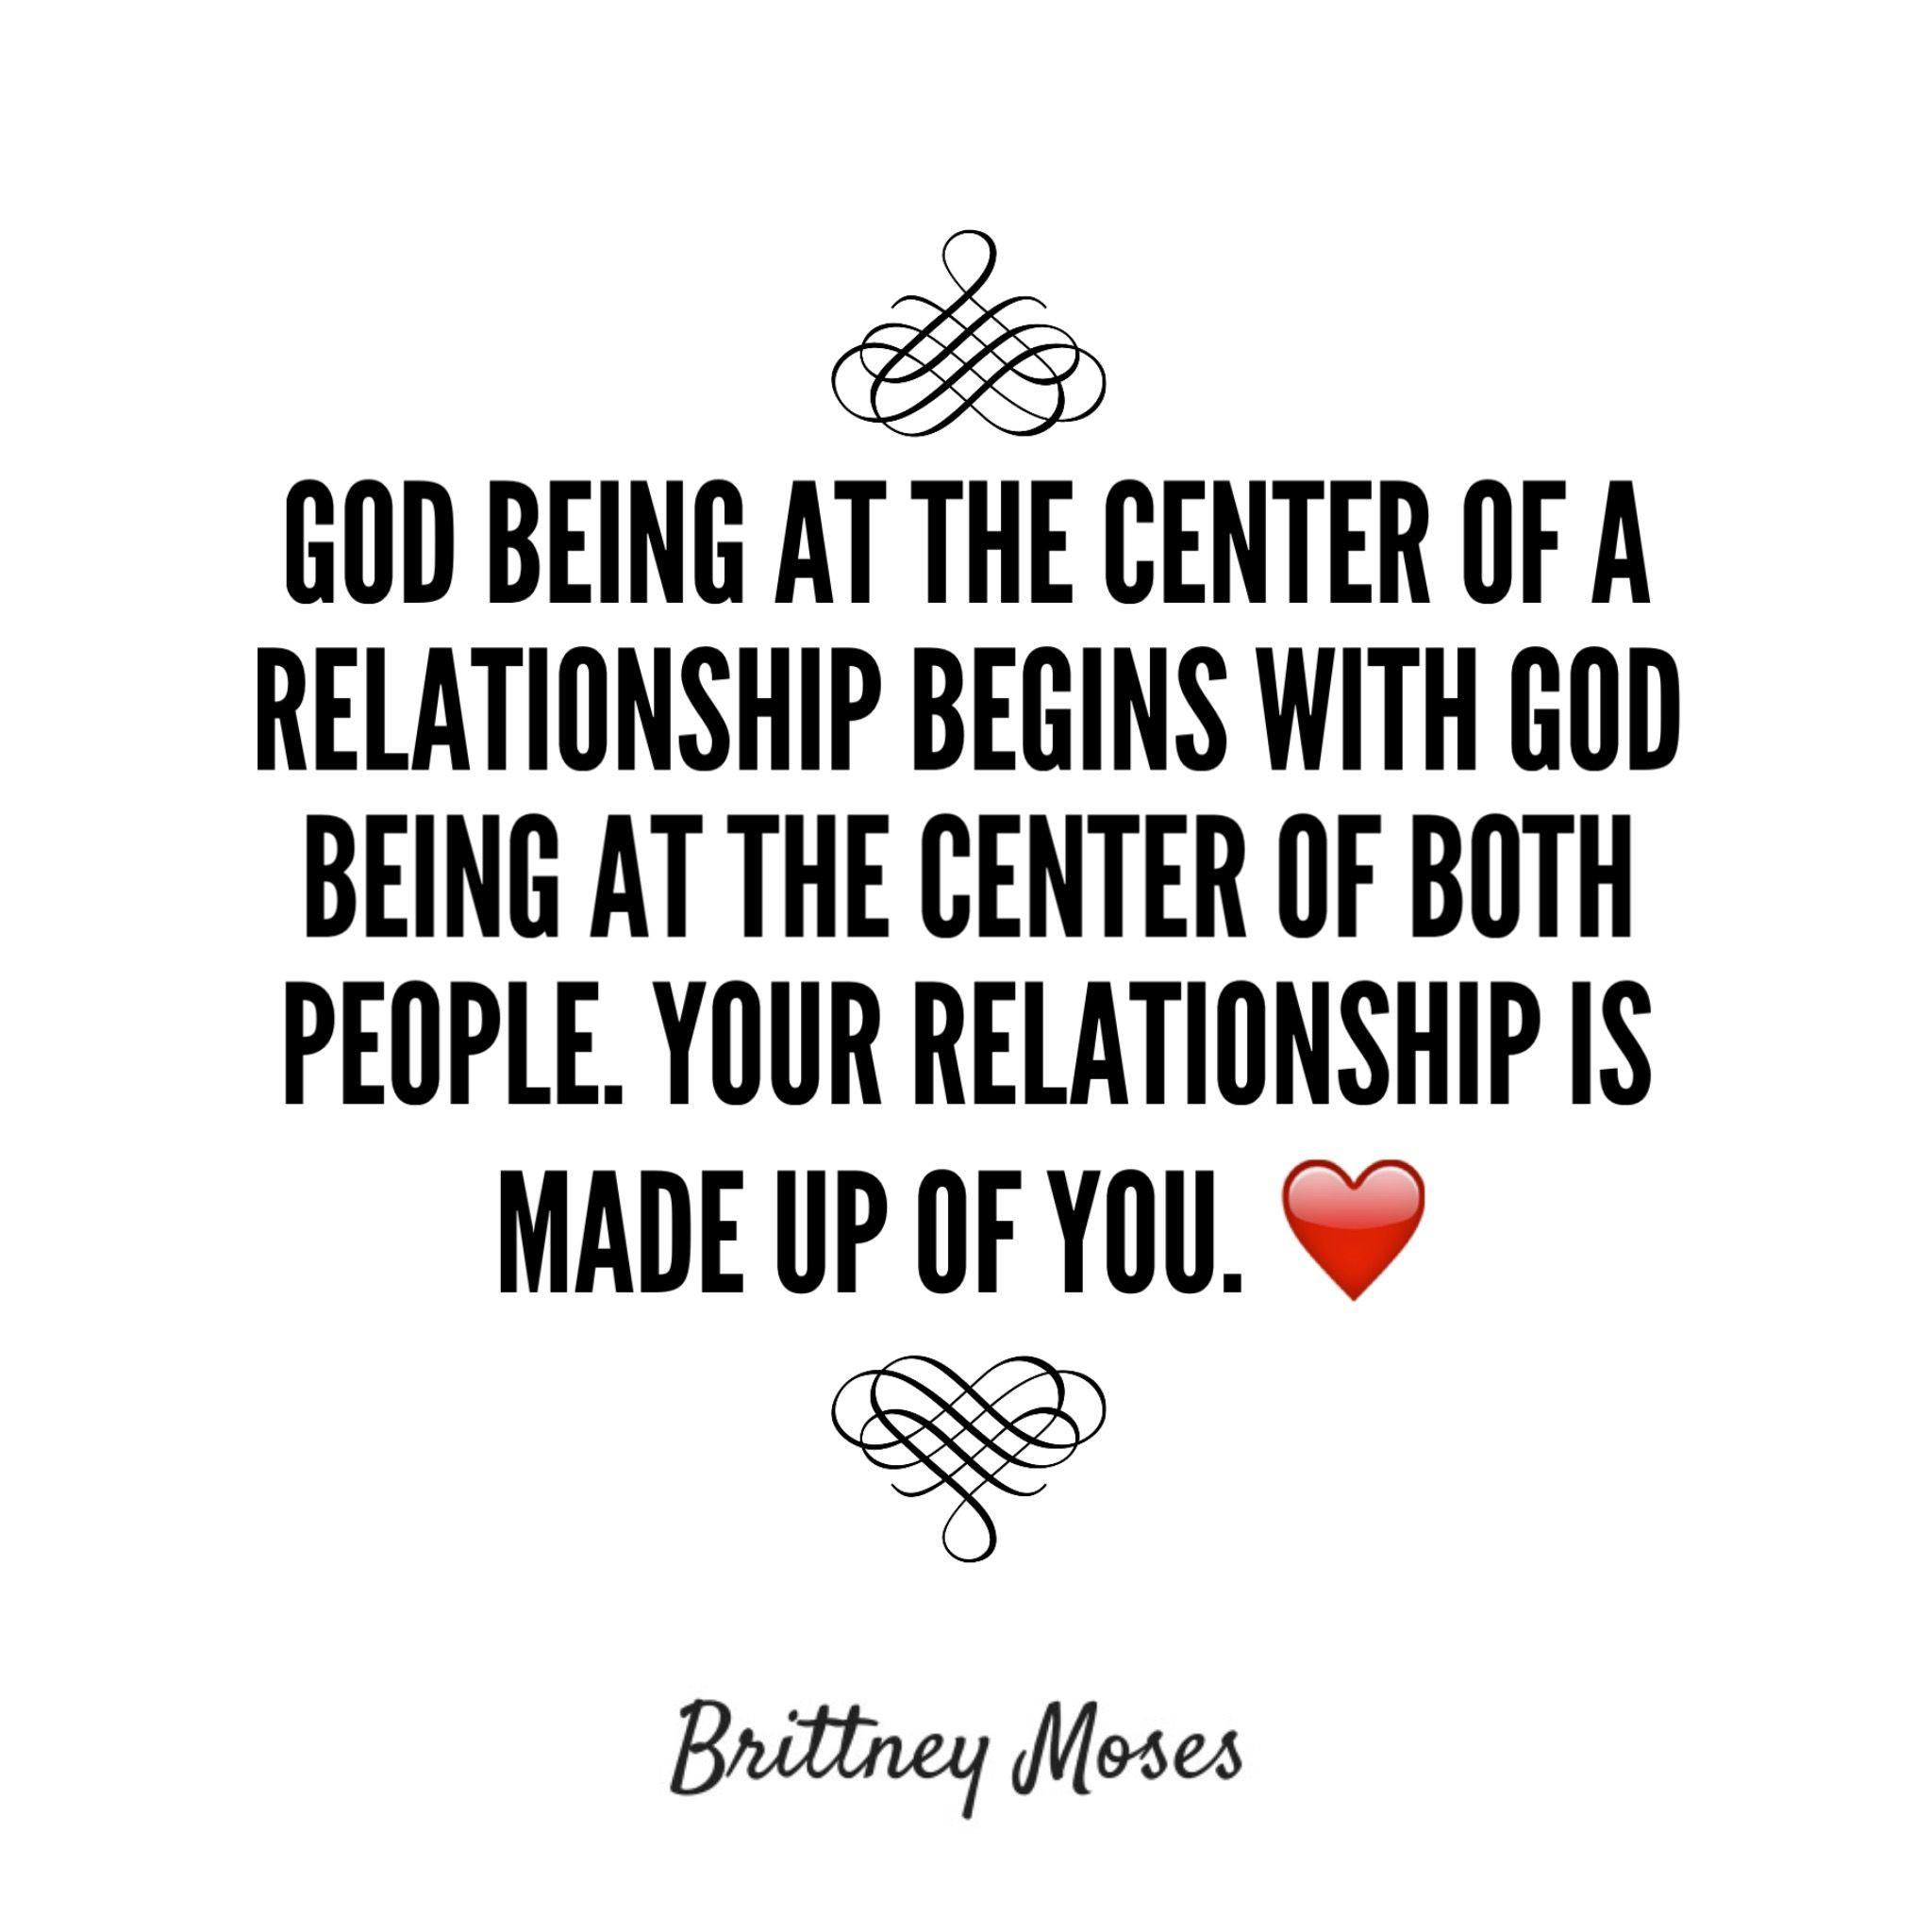 God Centered Relationship Quotes
 Relationships are made up of the people in them Godly